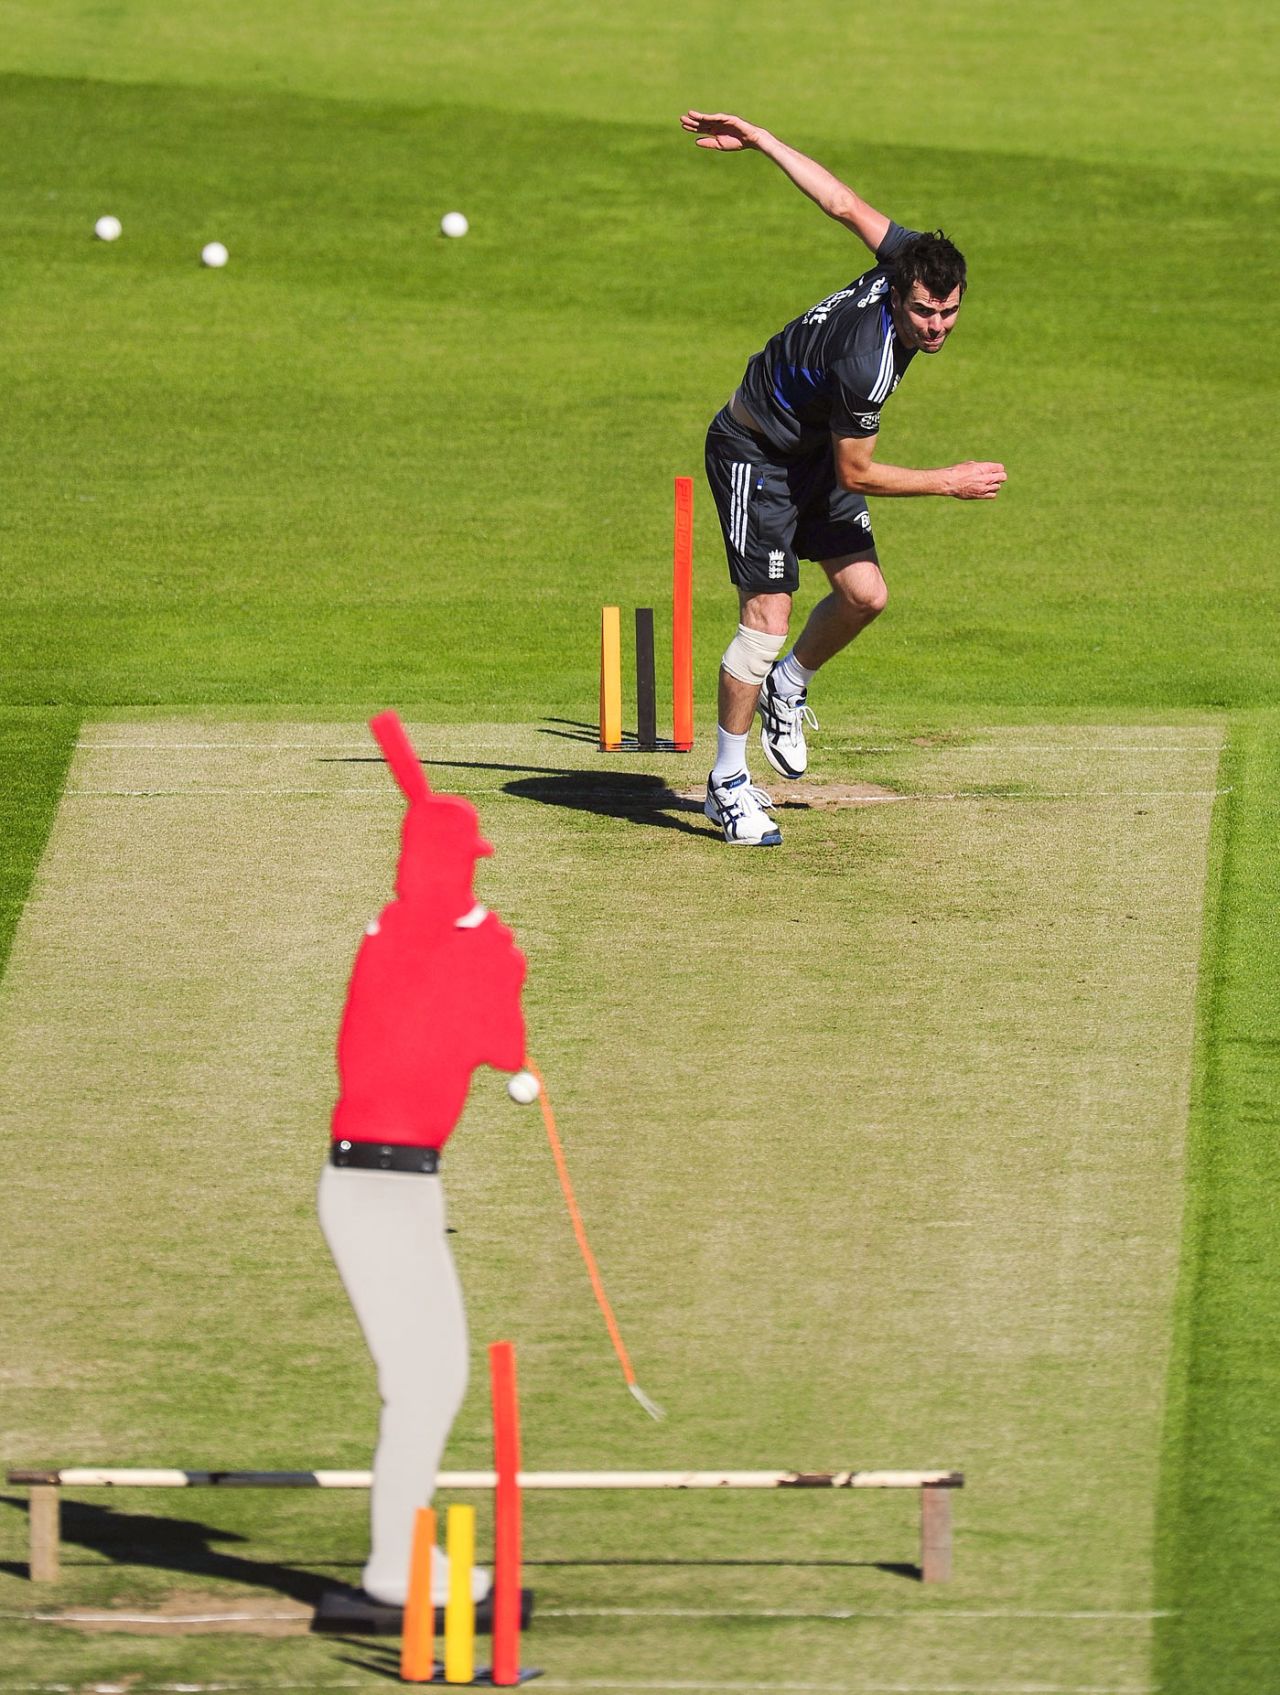 James Anderson bowls at a cut-out target , Chester-le-Street, September 7, 2012